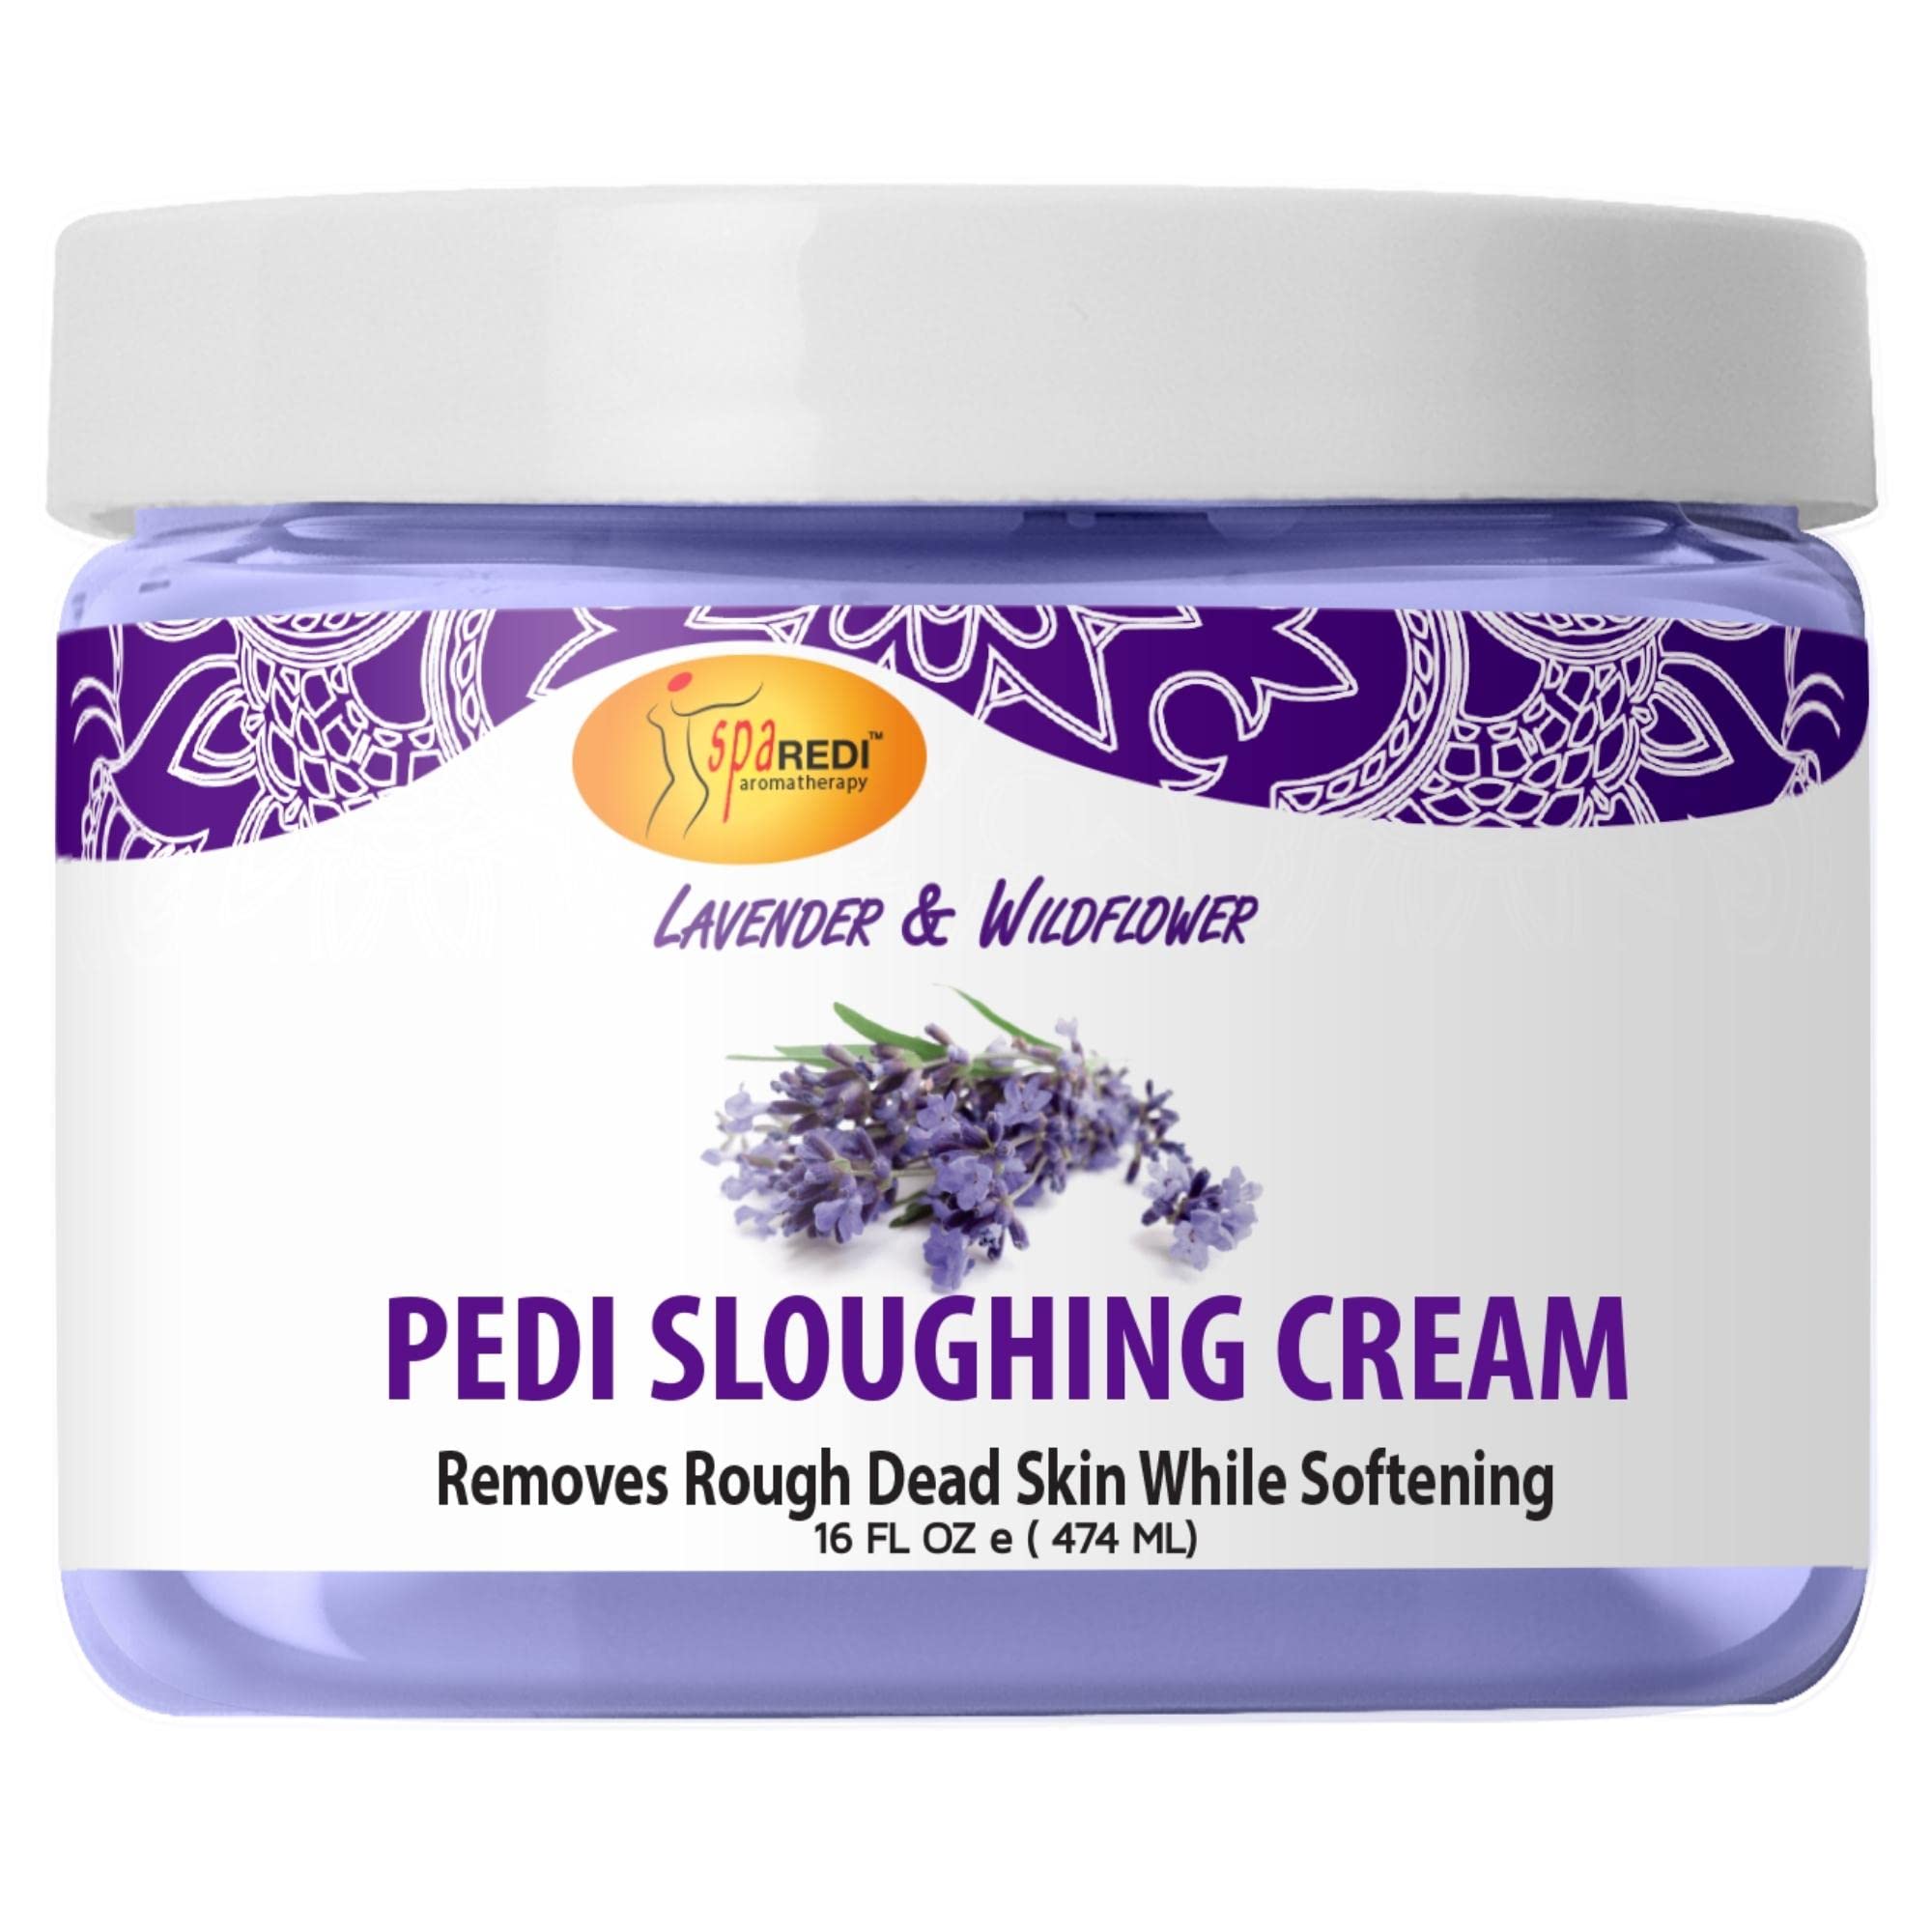 SPA REDI - Foot Cream, Sloughing Lotion, Lavender and Wildflower 16 Oz - Pedicure Massage Foot Care for Dry Cracked Feet, Scrub Gently, Exfoliating, Smooths and Eliminates Buildup of Dead Skin